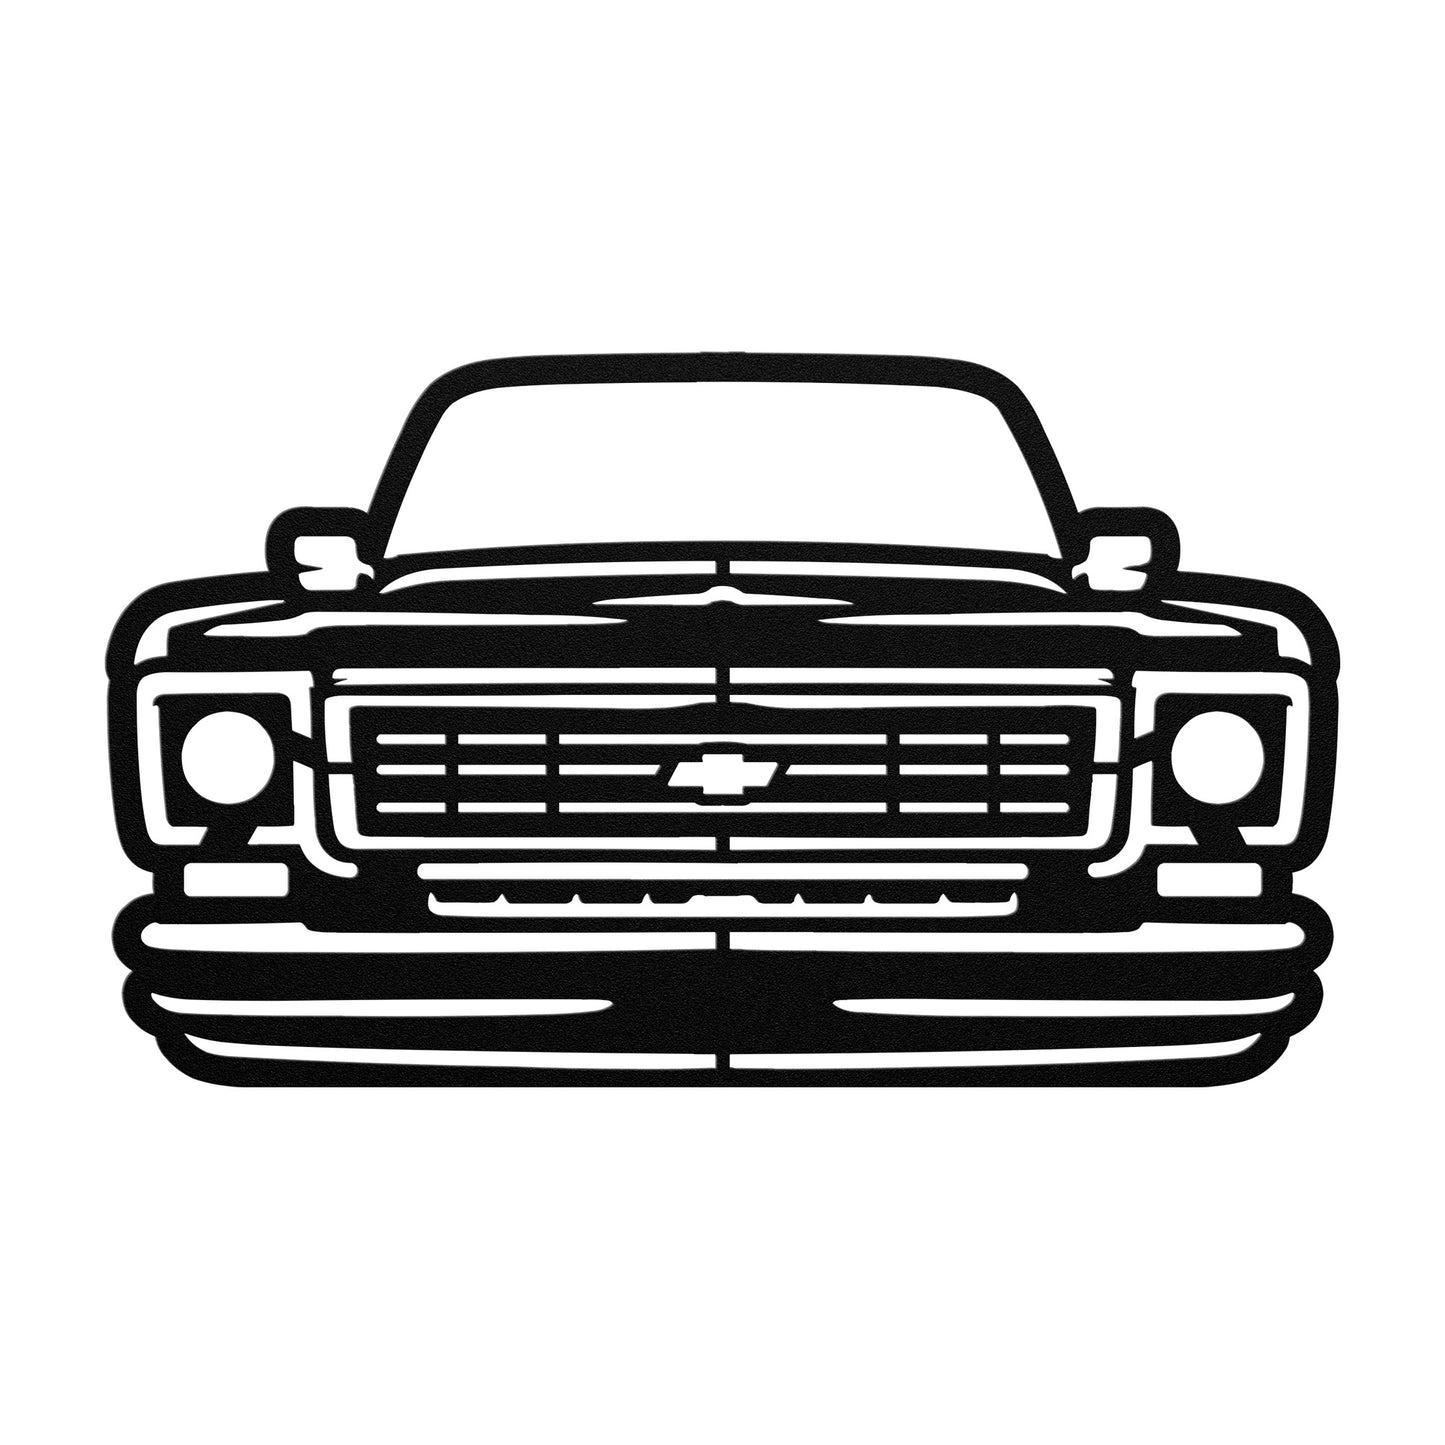 1973-76 Chevy Square Body Truck Front Metal Wall Art